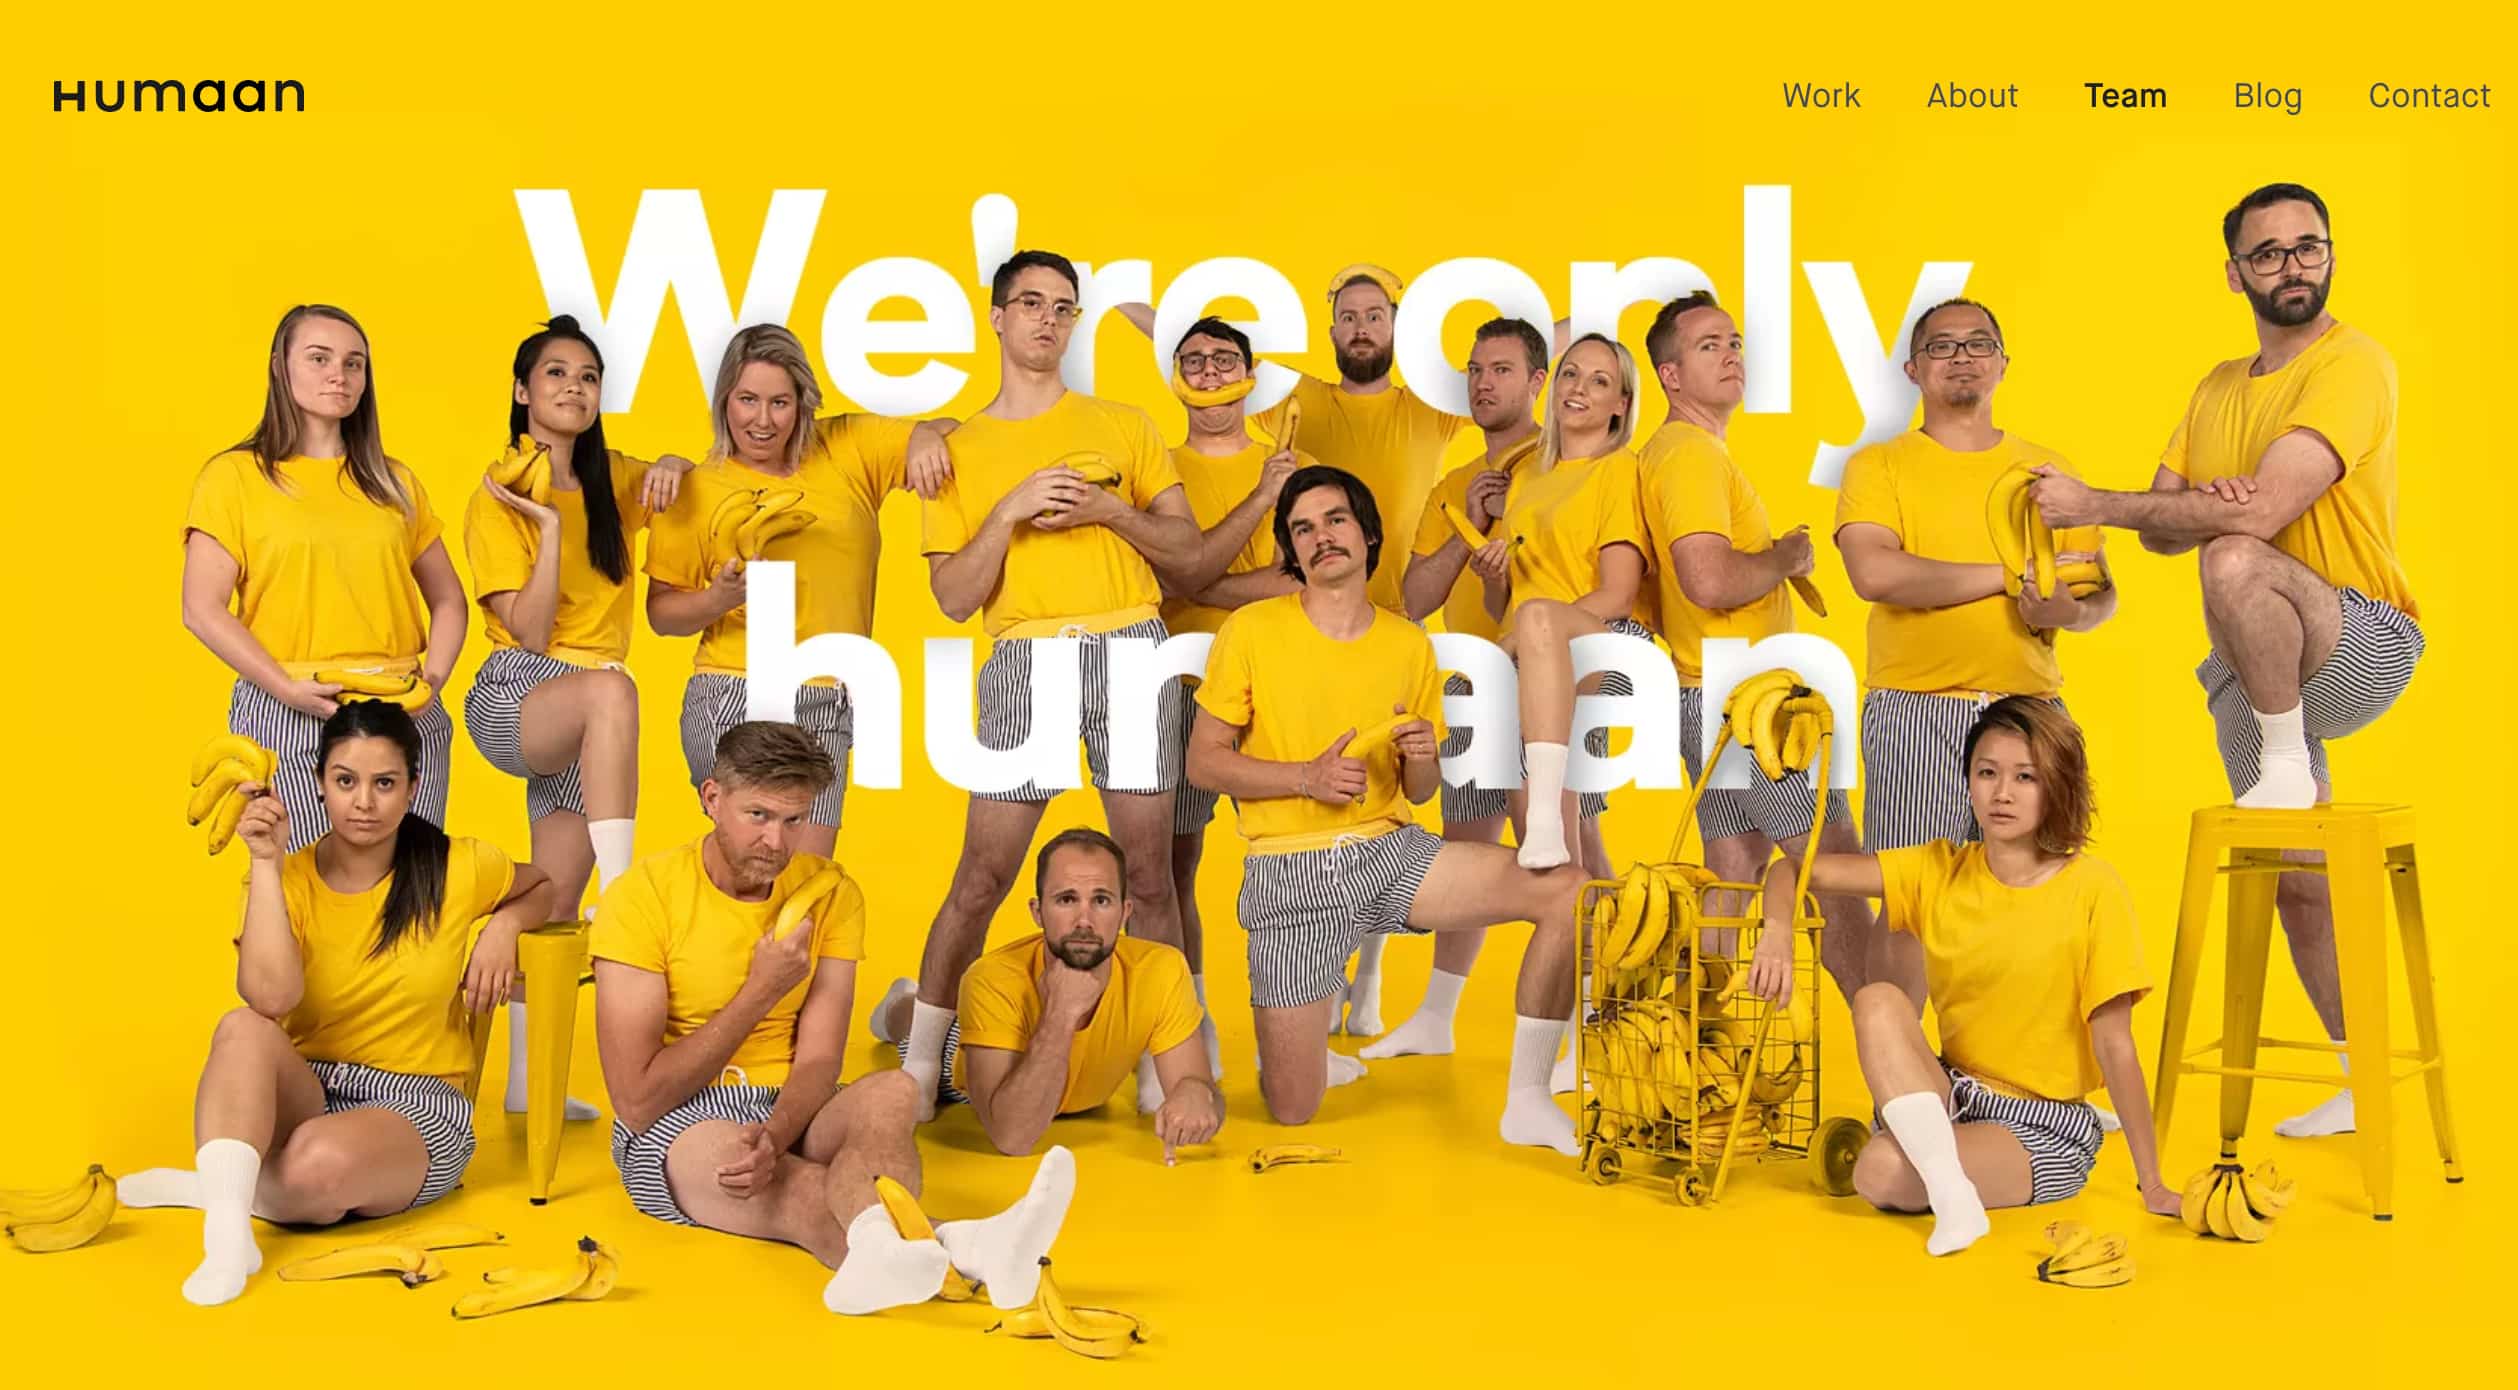 Meet the team page example from Humaan. Group photo of the team wearing matching outfits with bananas everywhere.